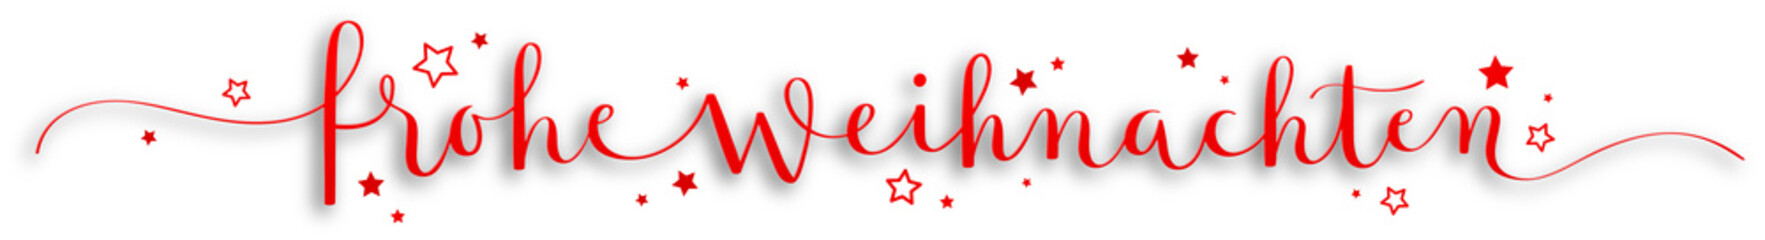 FROHE WEIHNACHTEN (MERRY CHRISTMAS in German) red brush calligraphy banner with stars on transparent background